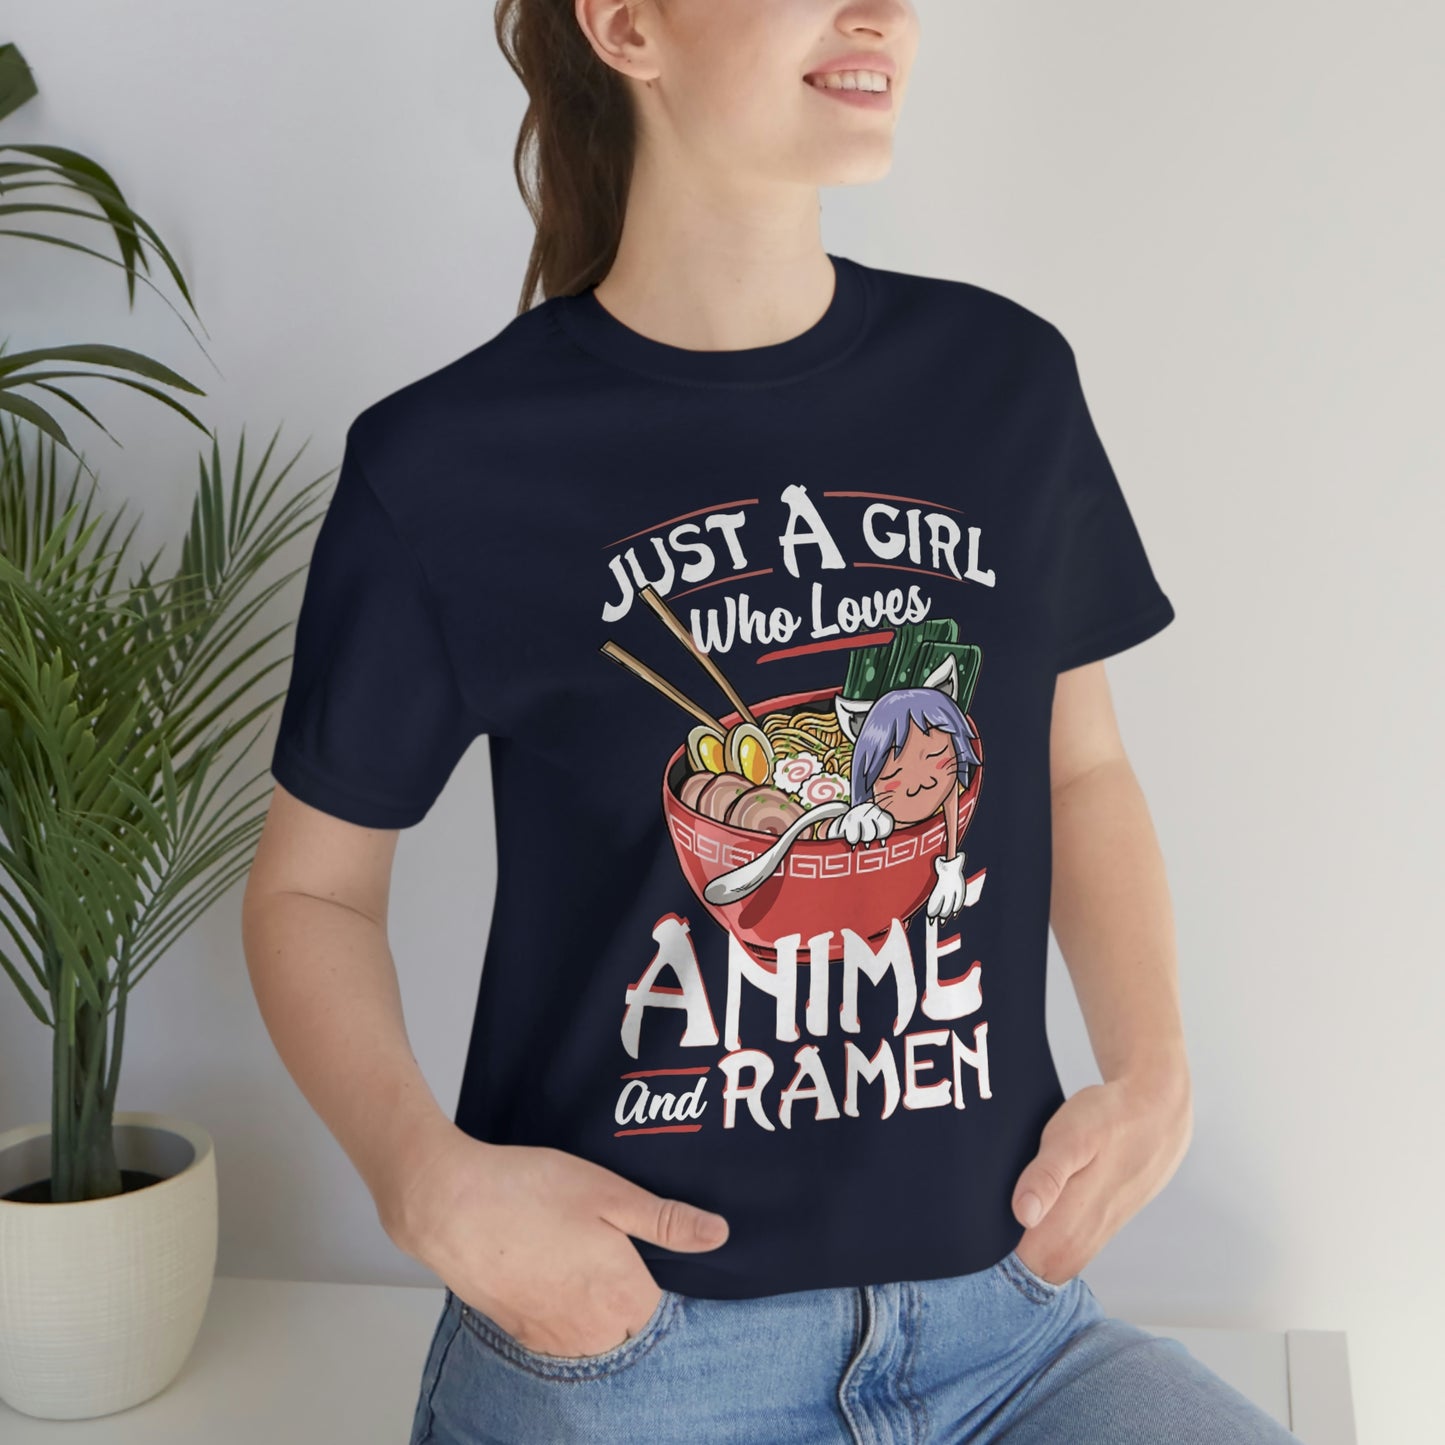 Just a girl who loves anime and ramen